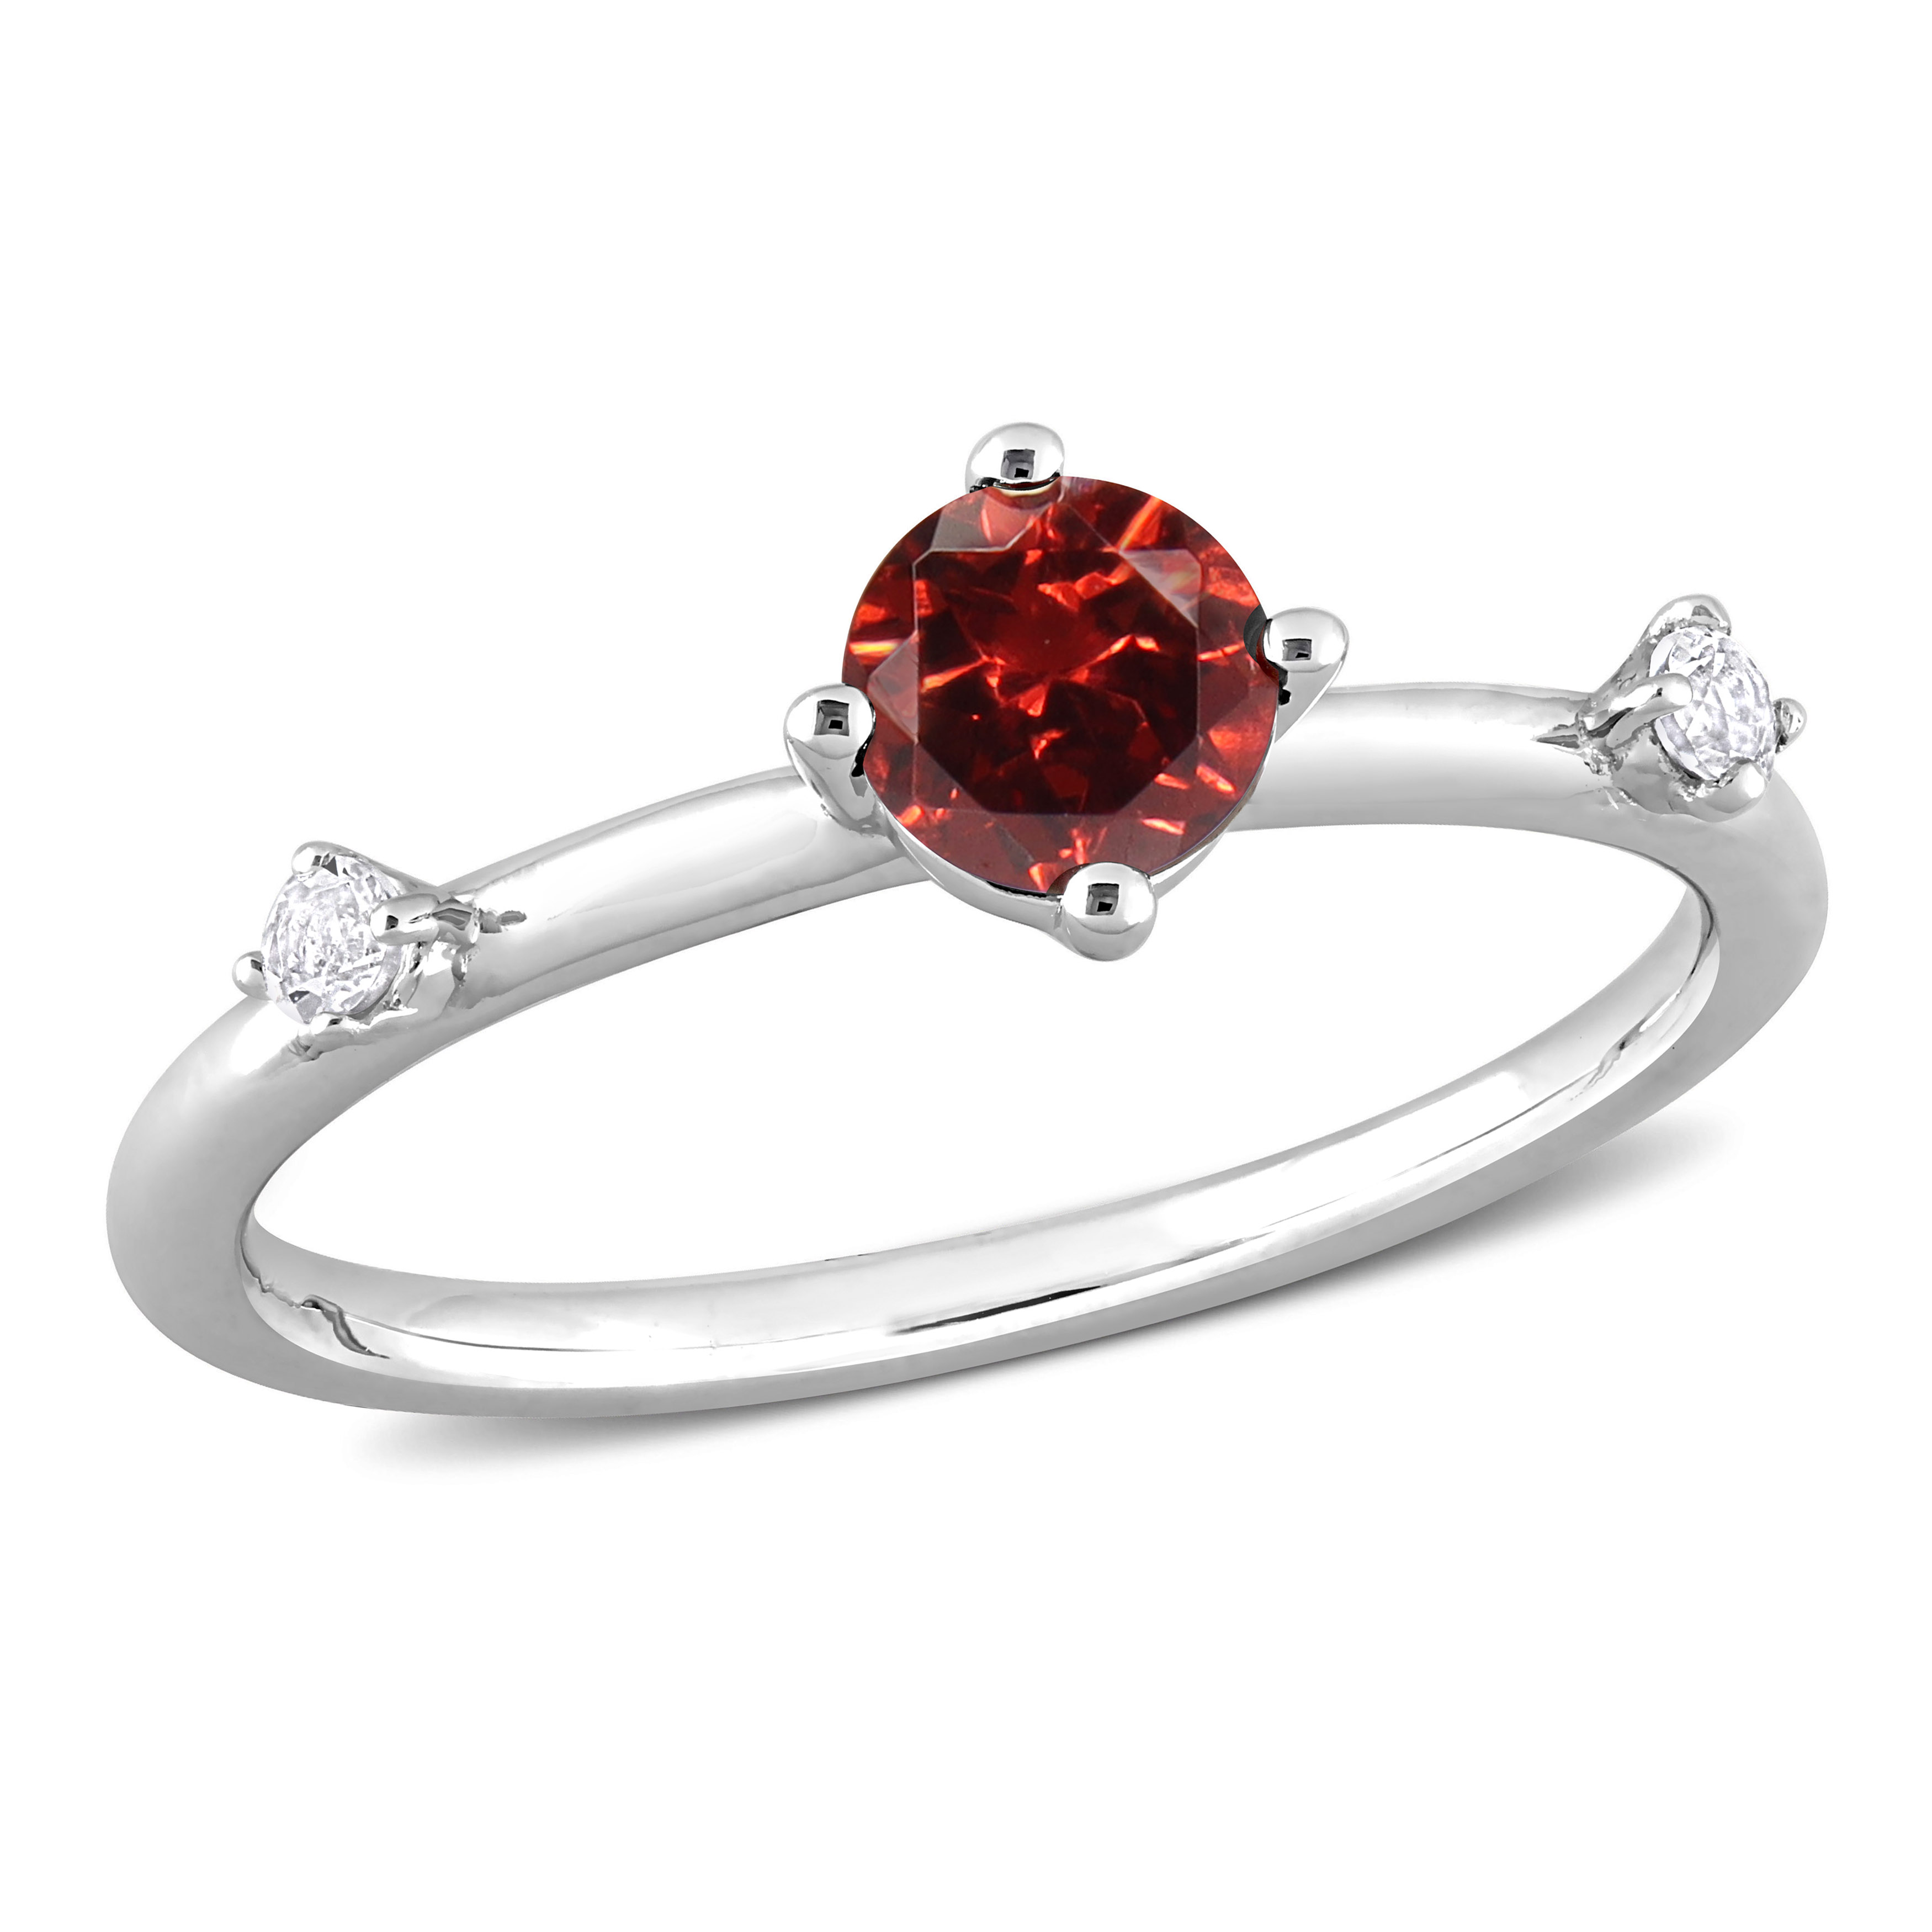 3/4 CT TGW Garnet and White Topaz 3-Stone Ring in Sterling Silver